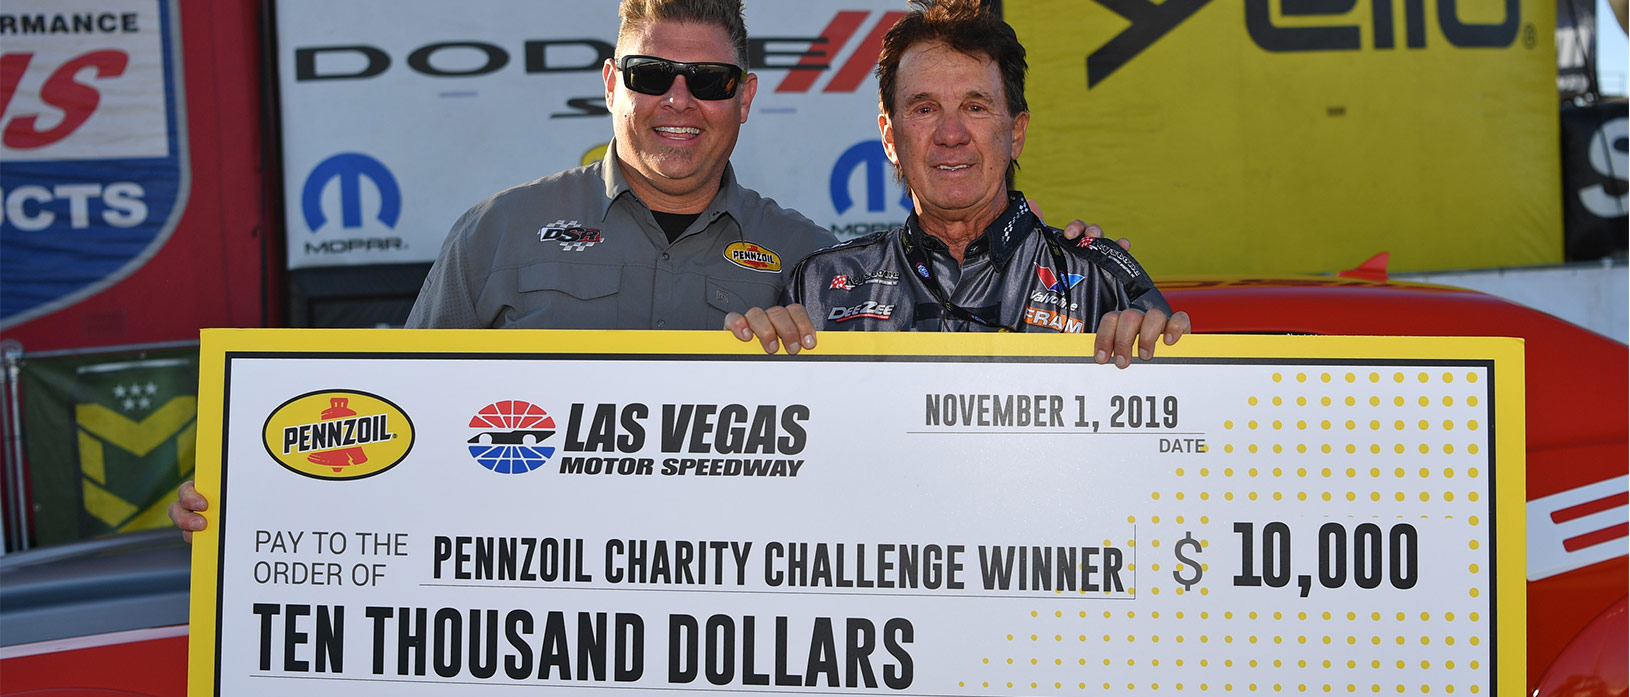 Pennzoil Takes “Fast Cash” to a New Level